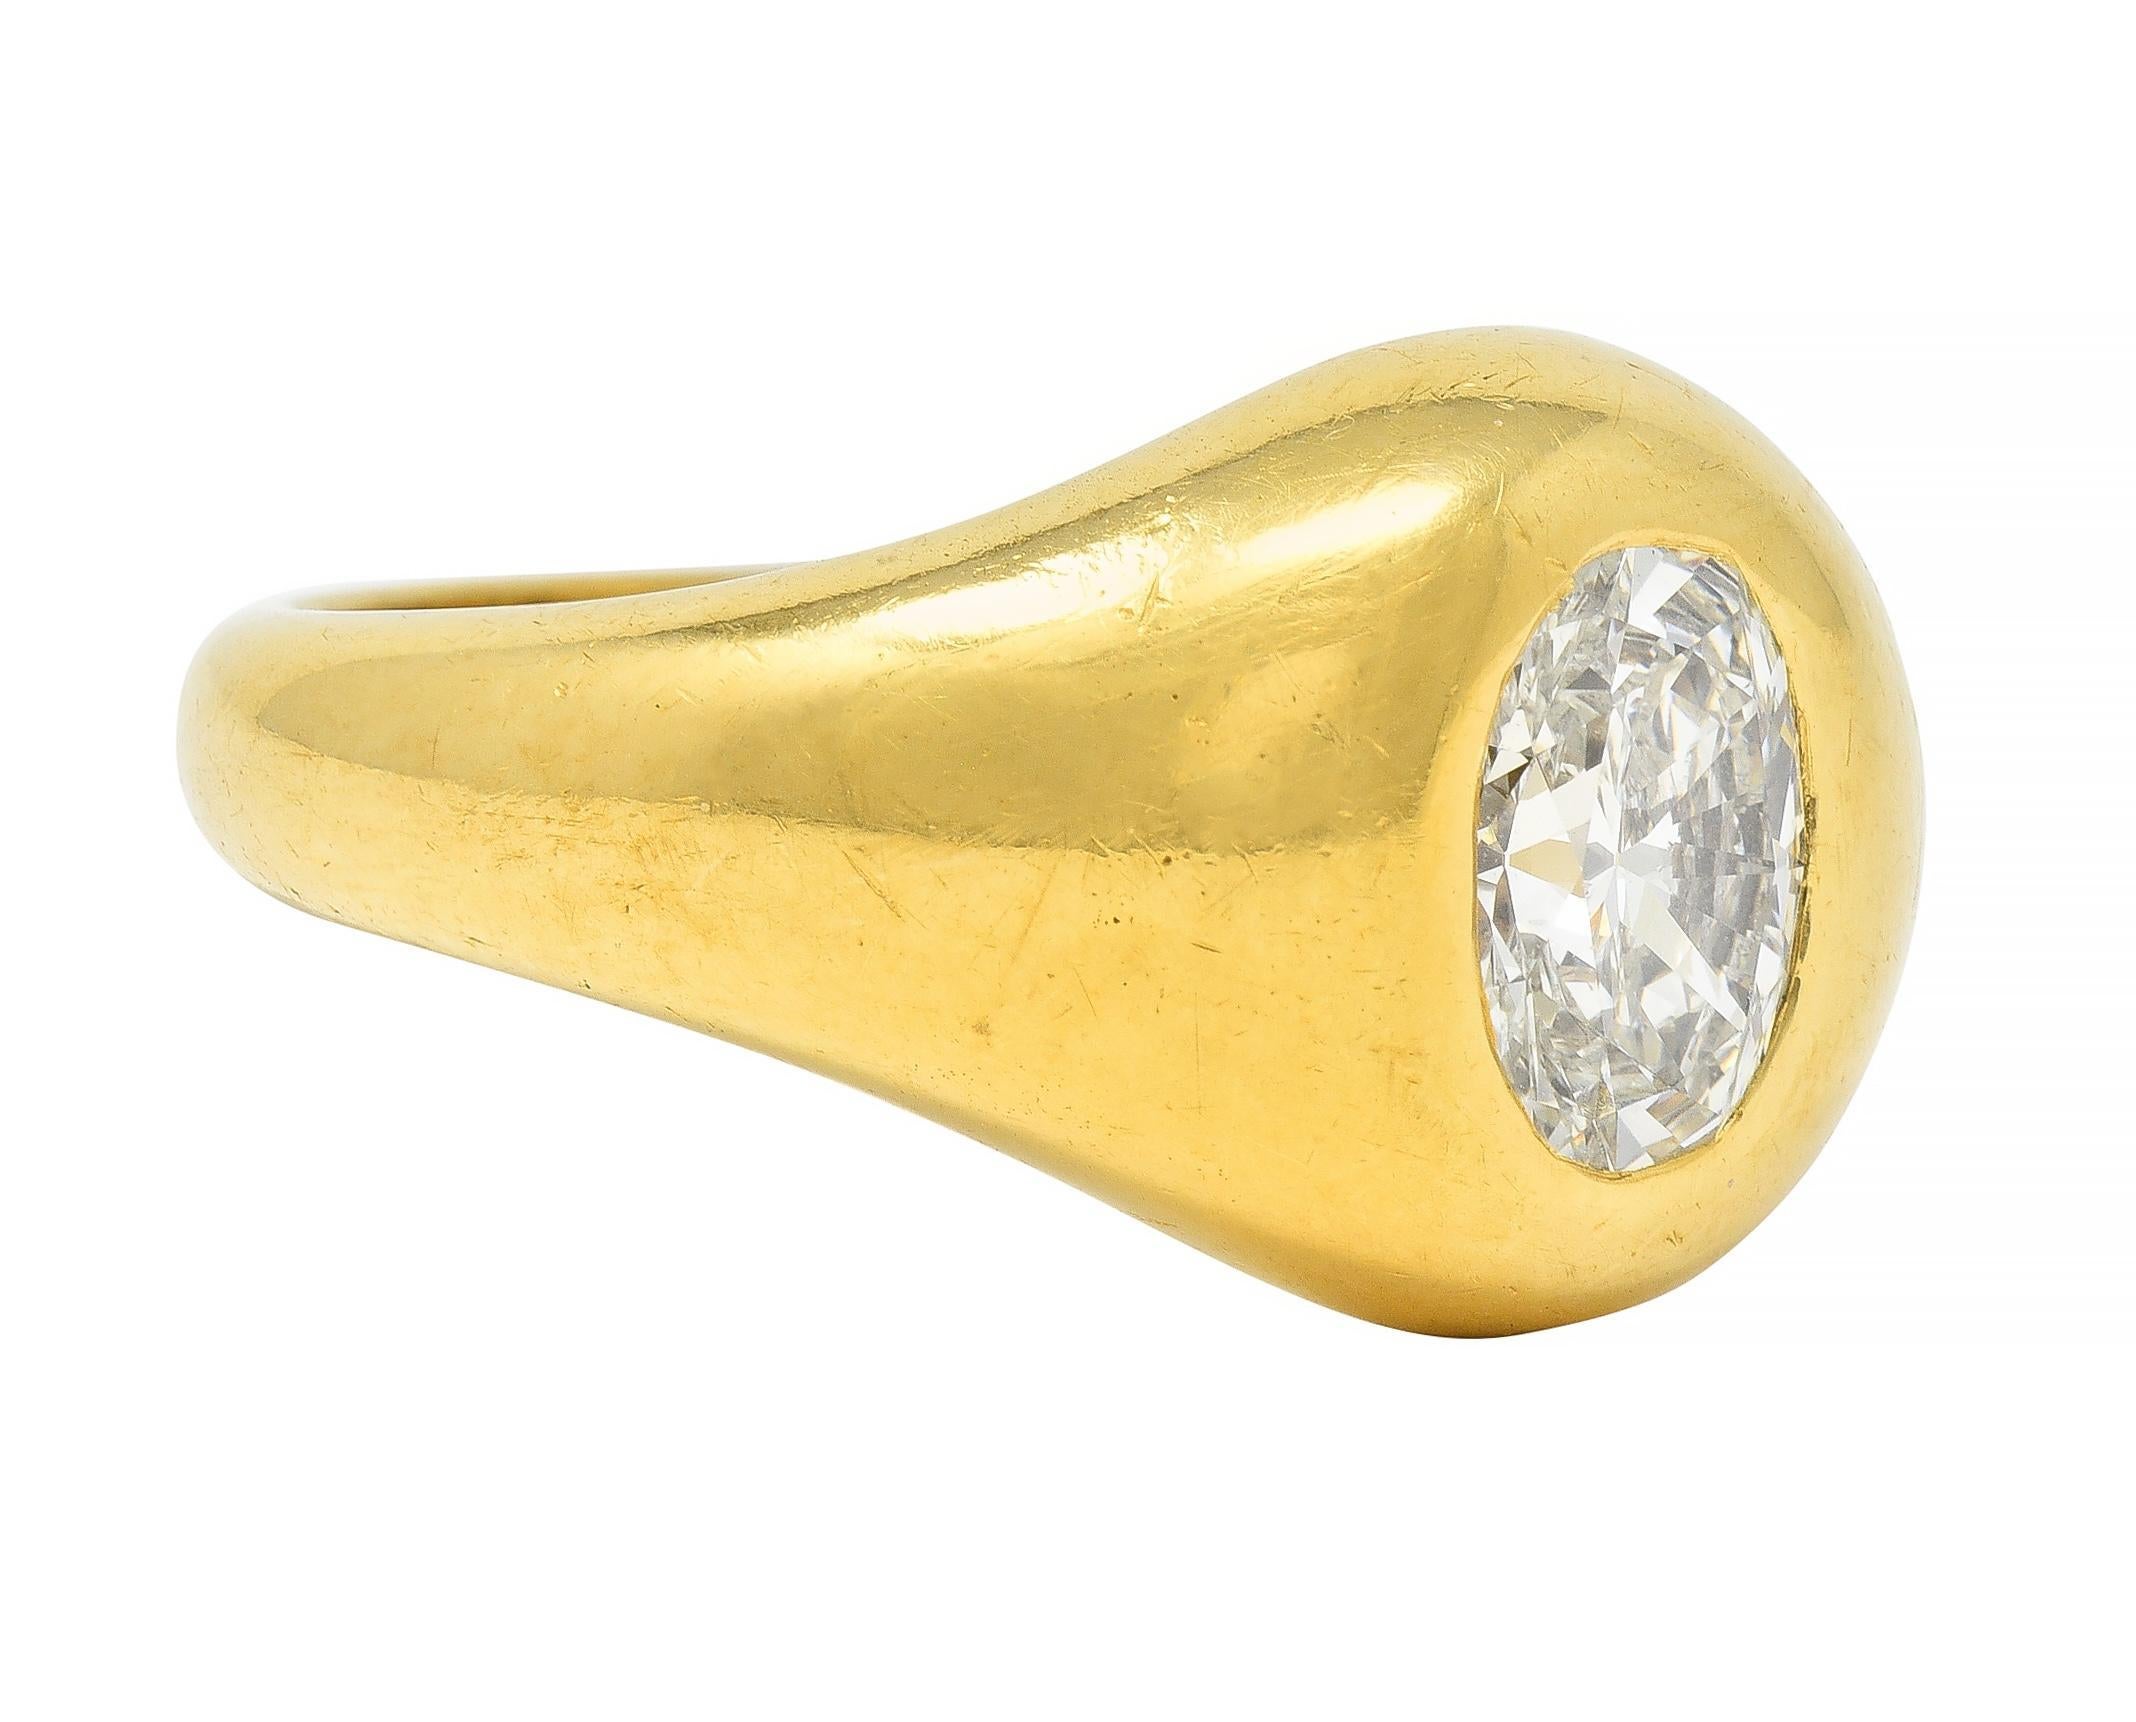 Centering an oval cut diamond weighing approximately 1.22 carats - F color with VS2 clarity
Flush set with a sinuous oval-shaped face surround 
With rounded shoulders and profile 
Tested as 18 karat gold 
Numbered and fully signed for Cartier
Circa: